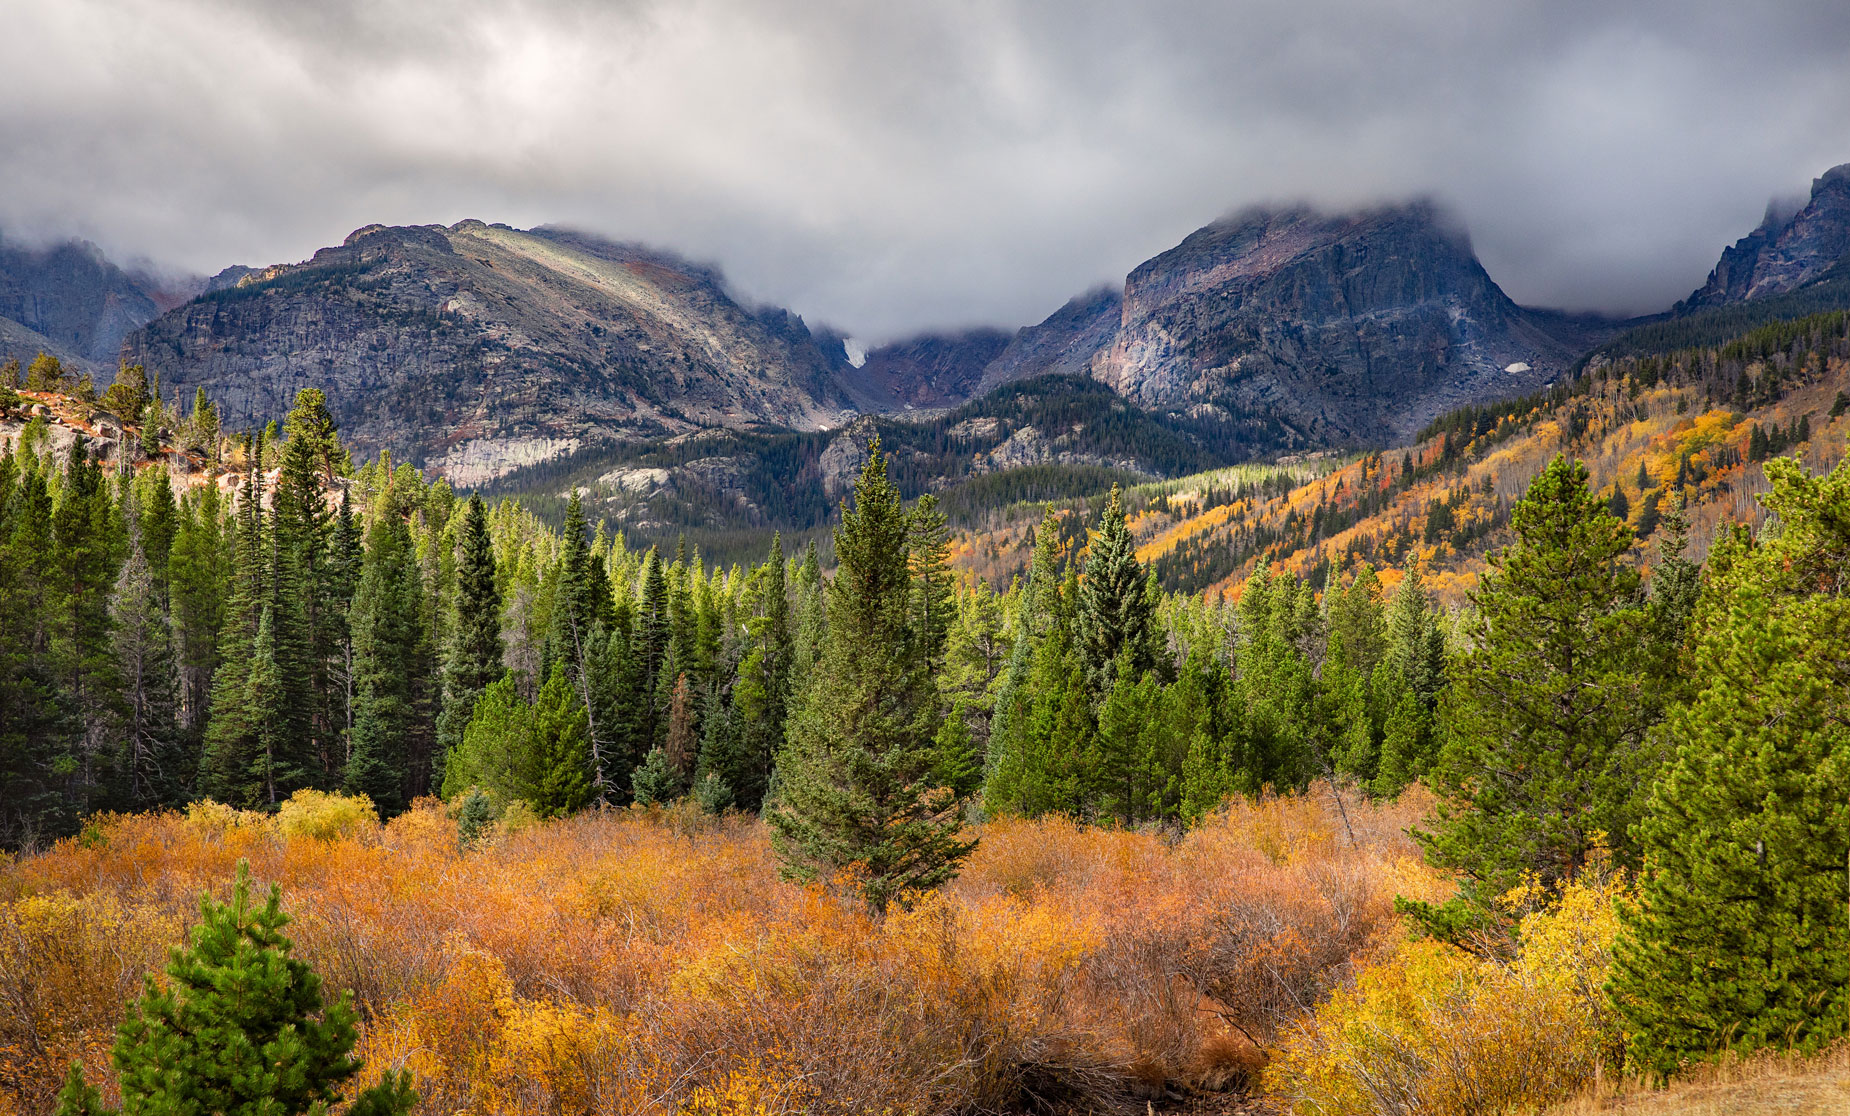 the rocky mountains shrouded in mist with fall colored trees in the foreground